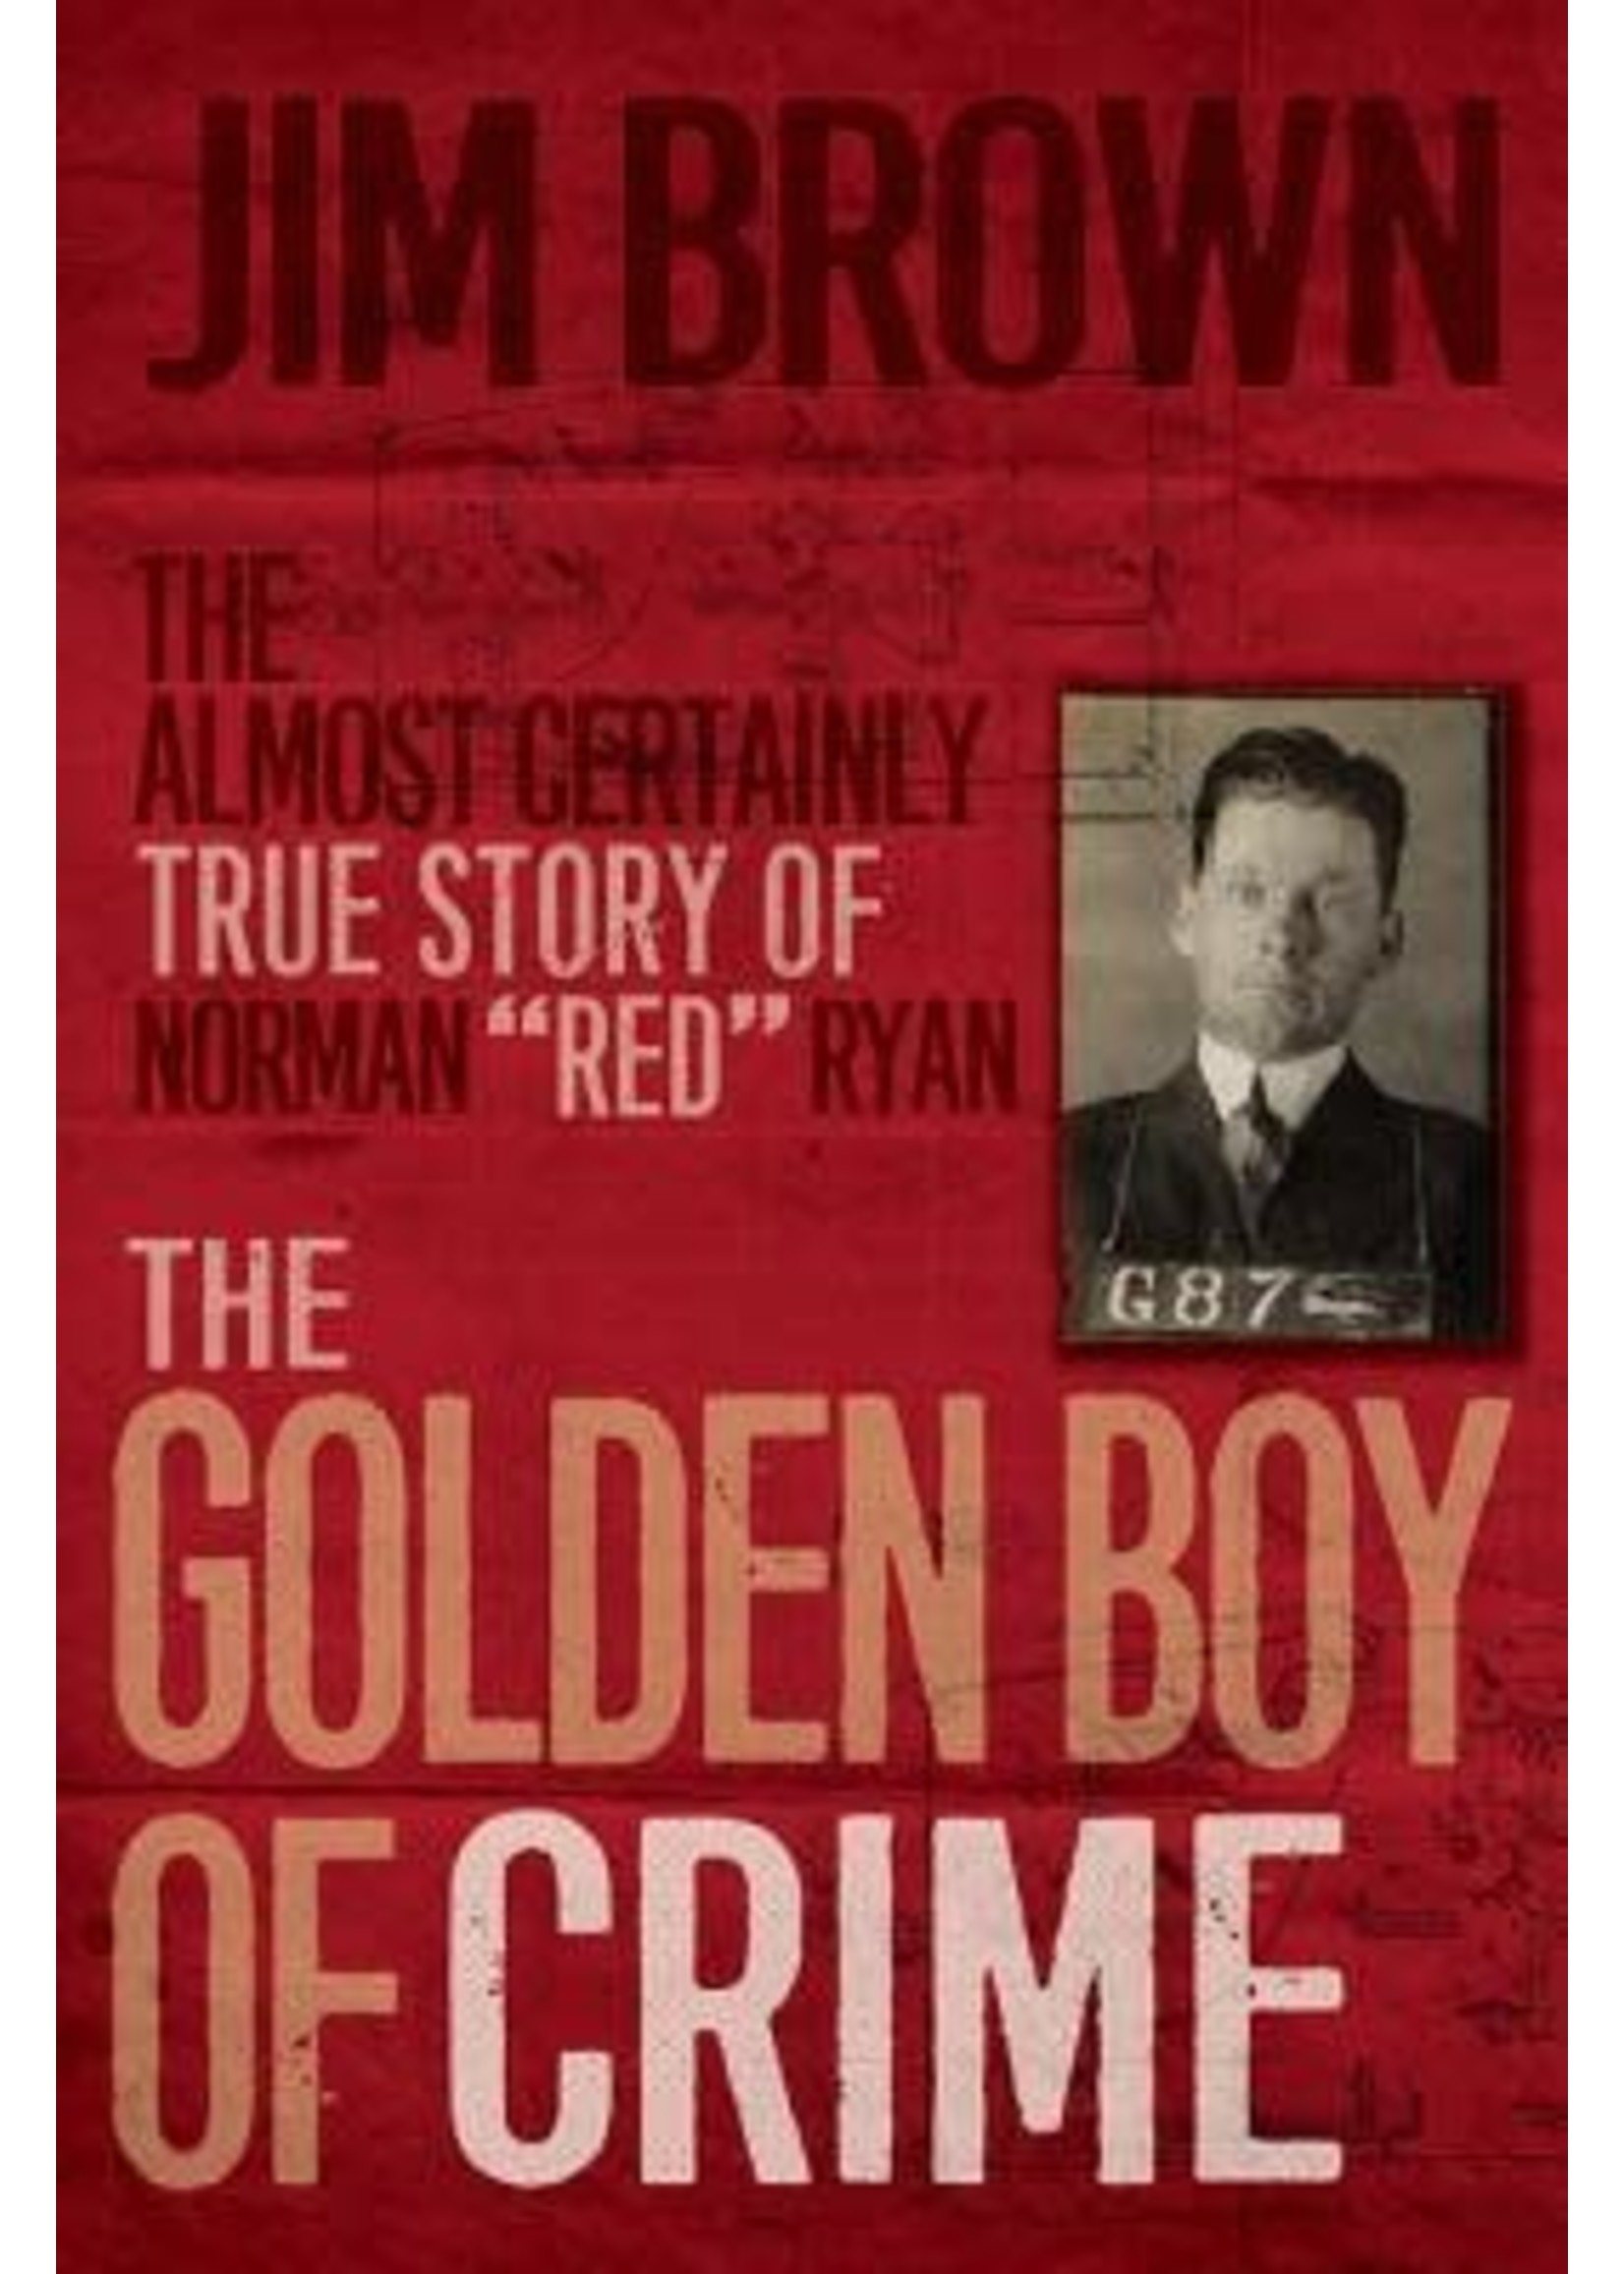 The Golden Boy of Crime: The Almost Certainly True Story of Norman "Red" Ryan by Jim Brown